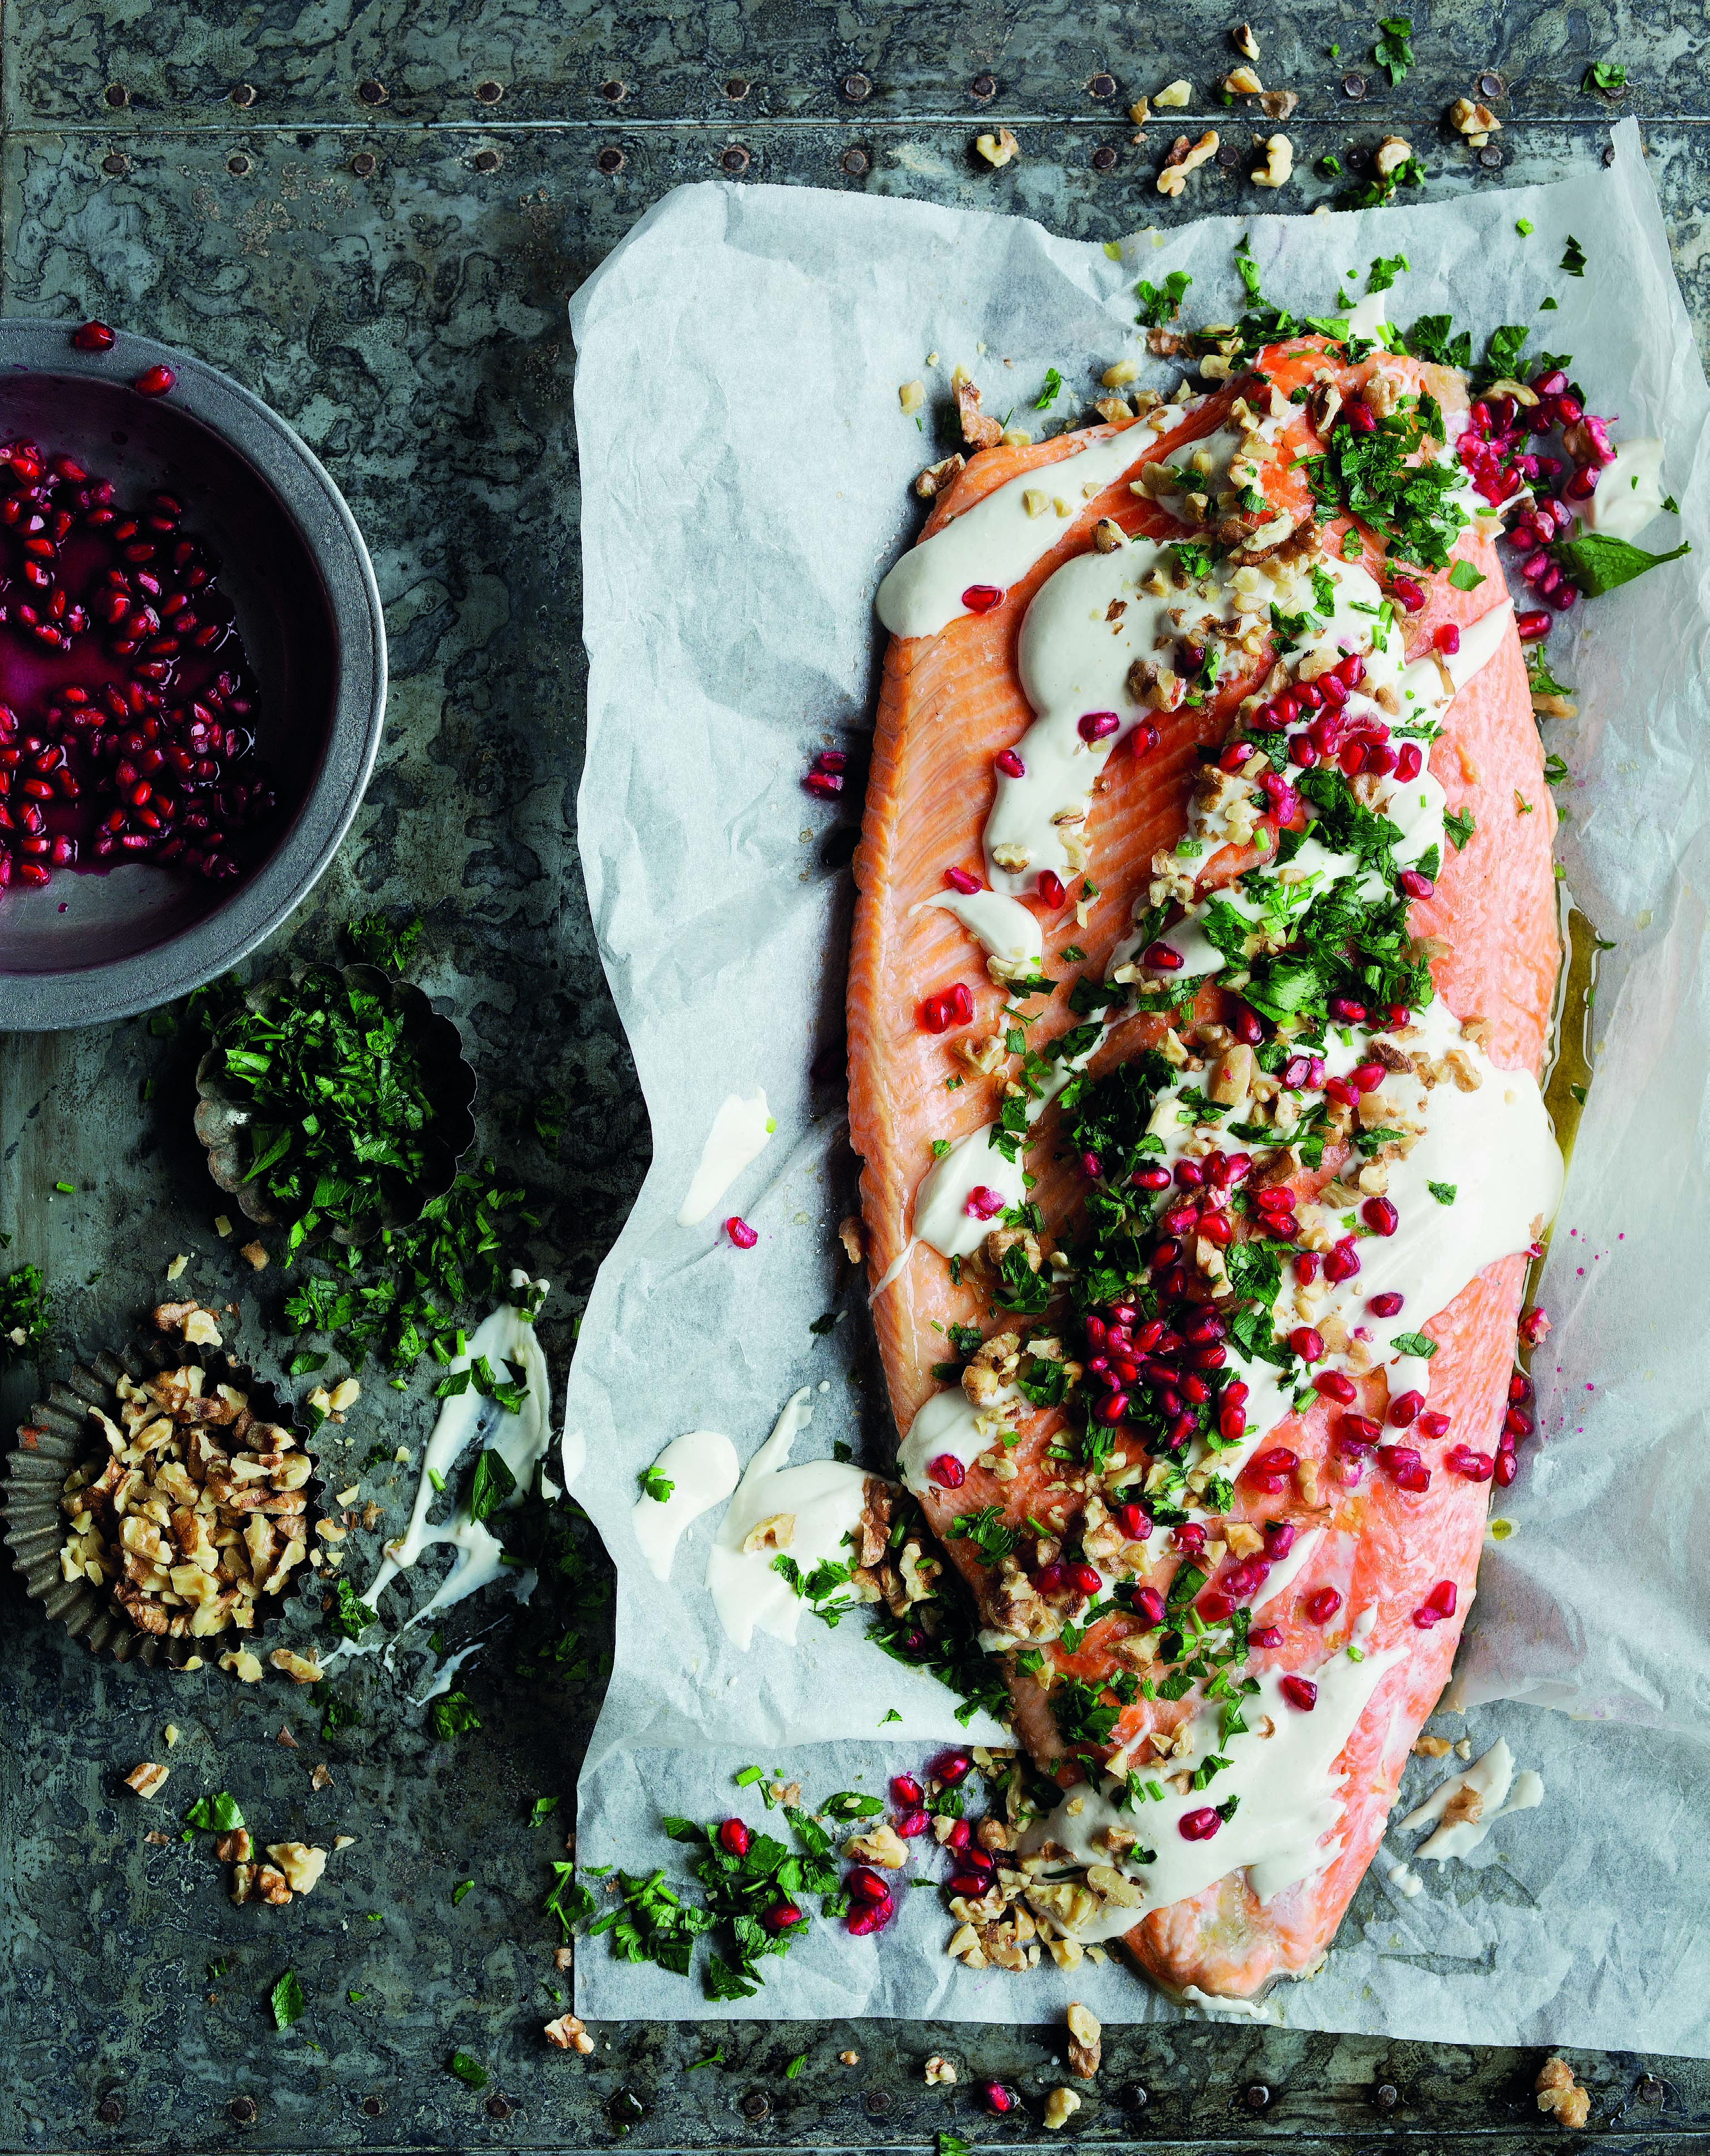 Delicious Feel Good Food Cookbook with Salmon with Tahini Recipe by Valli Little